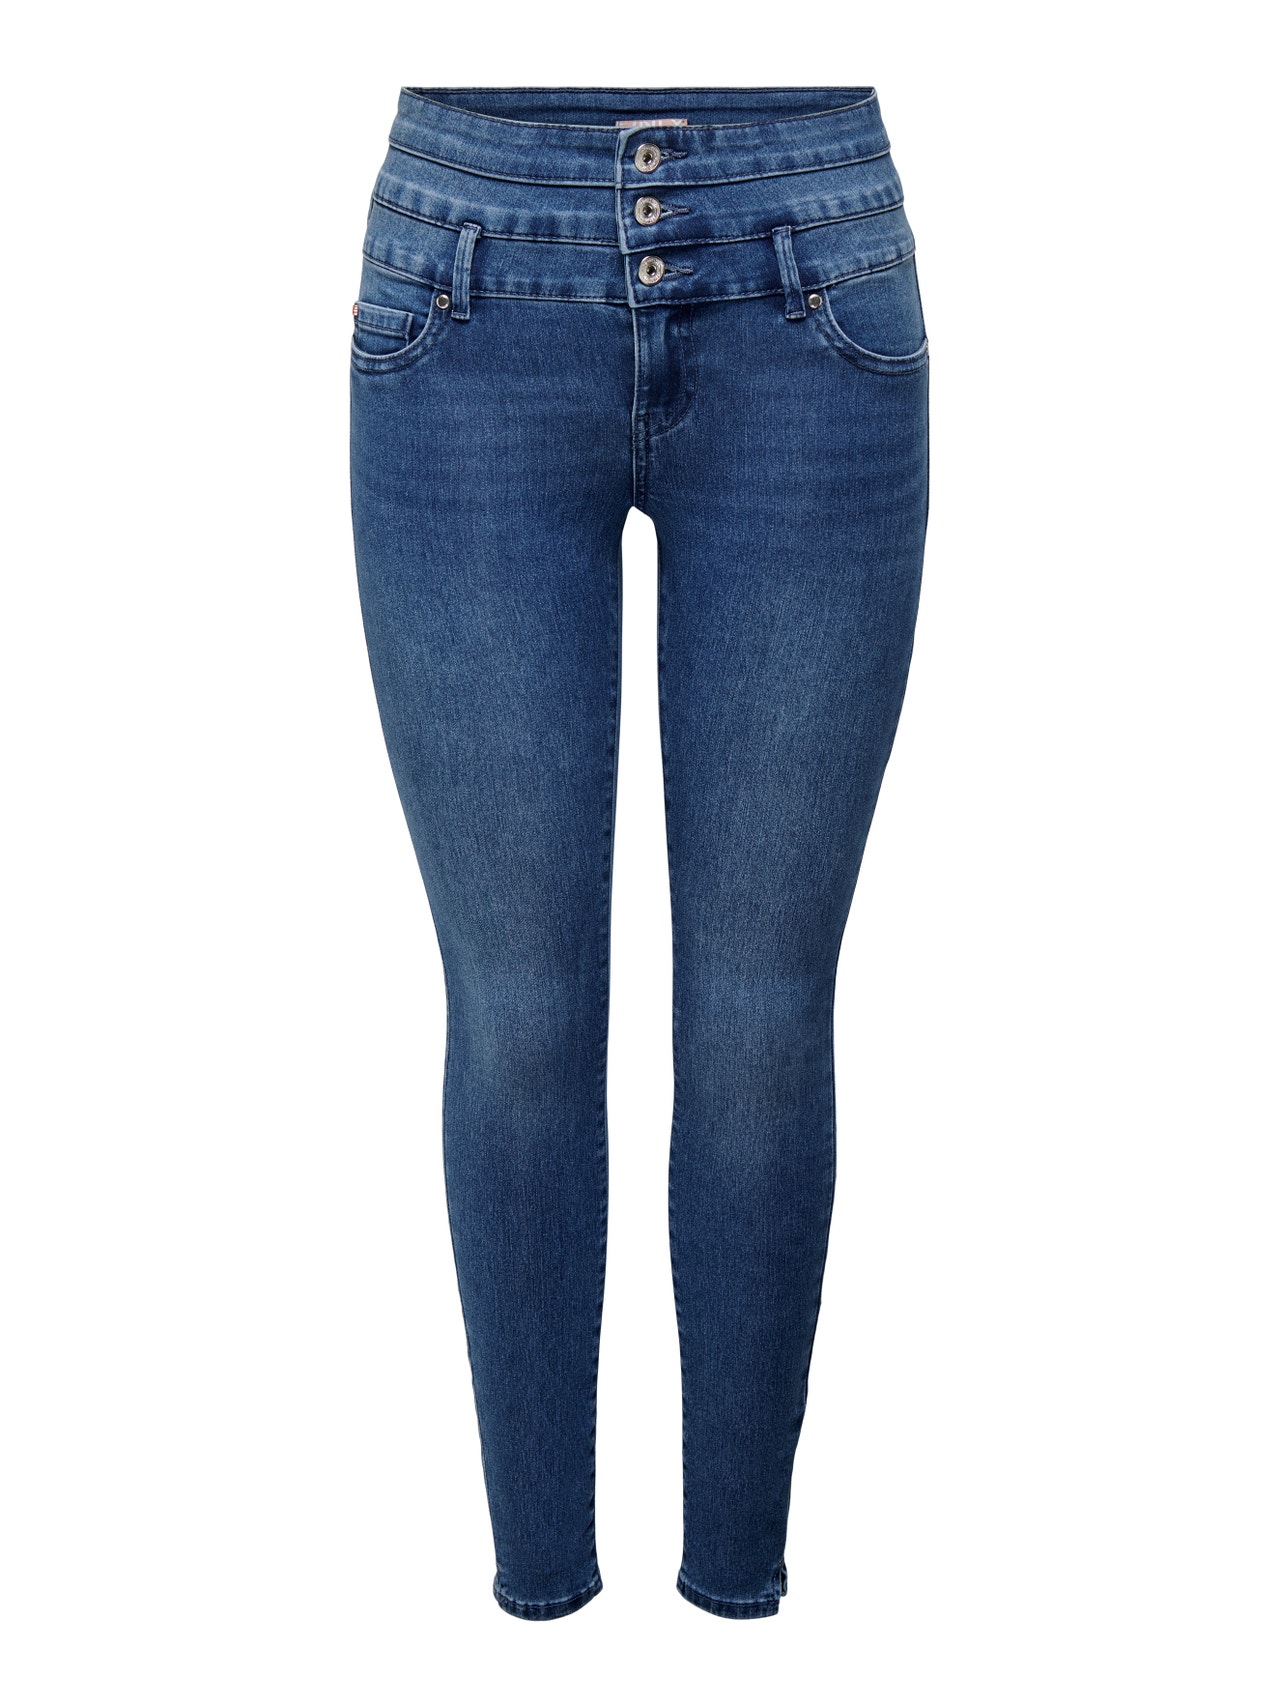 ONLY Skinny Fit Hohe Taille Jeans -Medium Blue Denim - 15229245